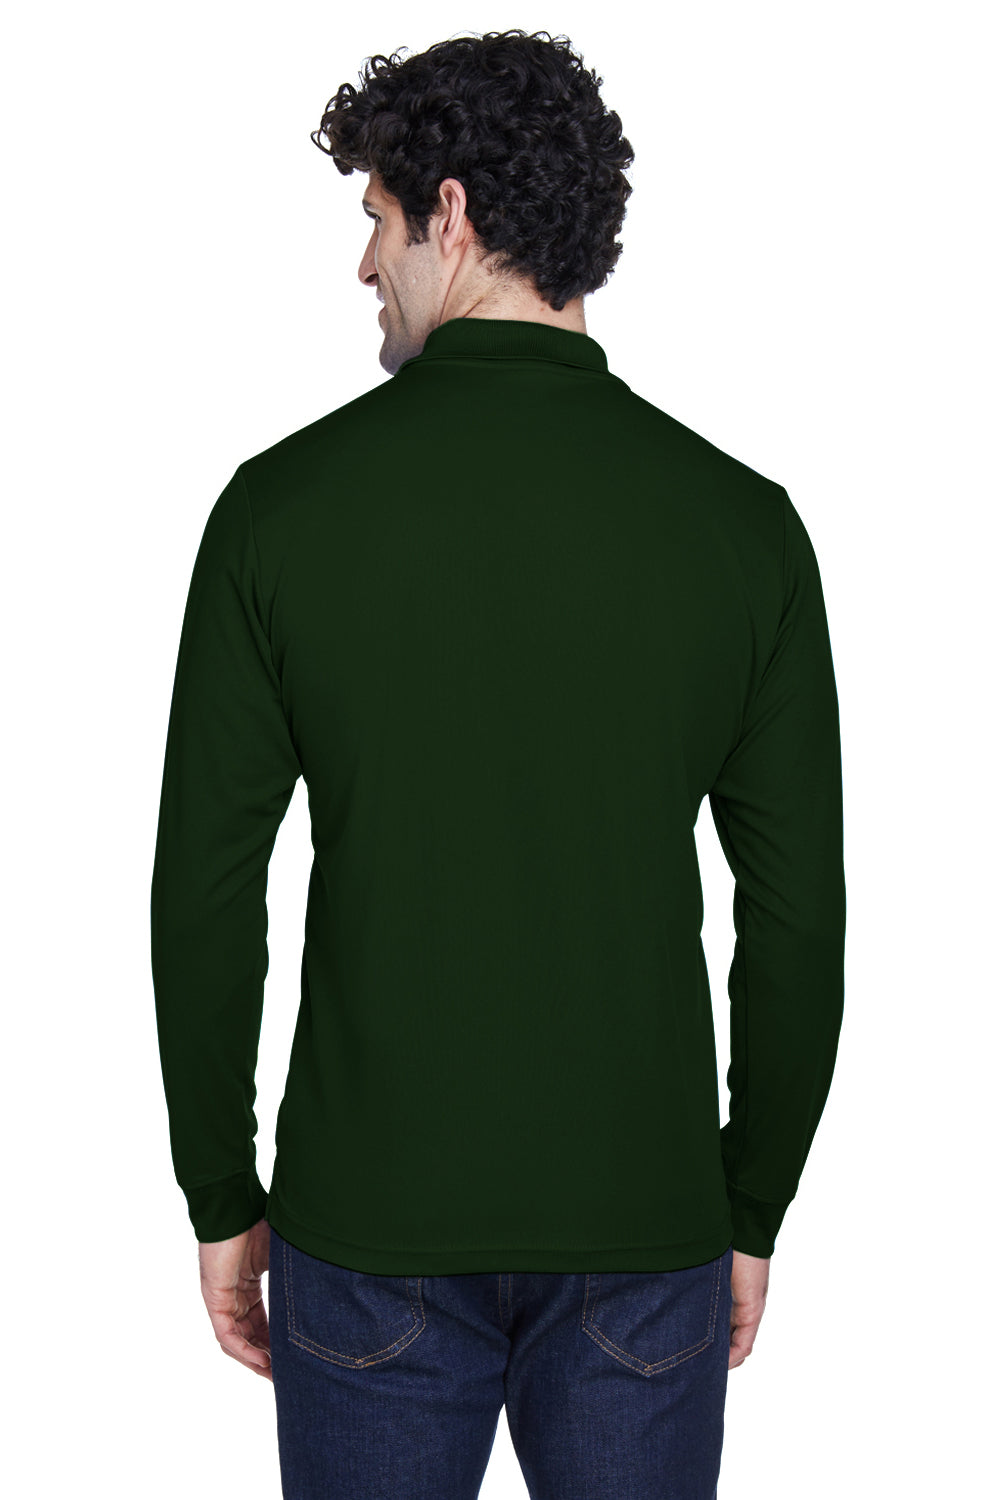 Core 365 88192 Mens Pinnacle Performance Moisture Wicking Long Sleeve Polo Shirt Forest Green Back